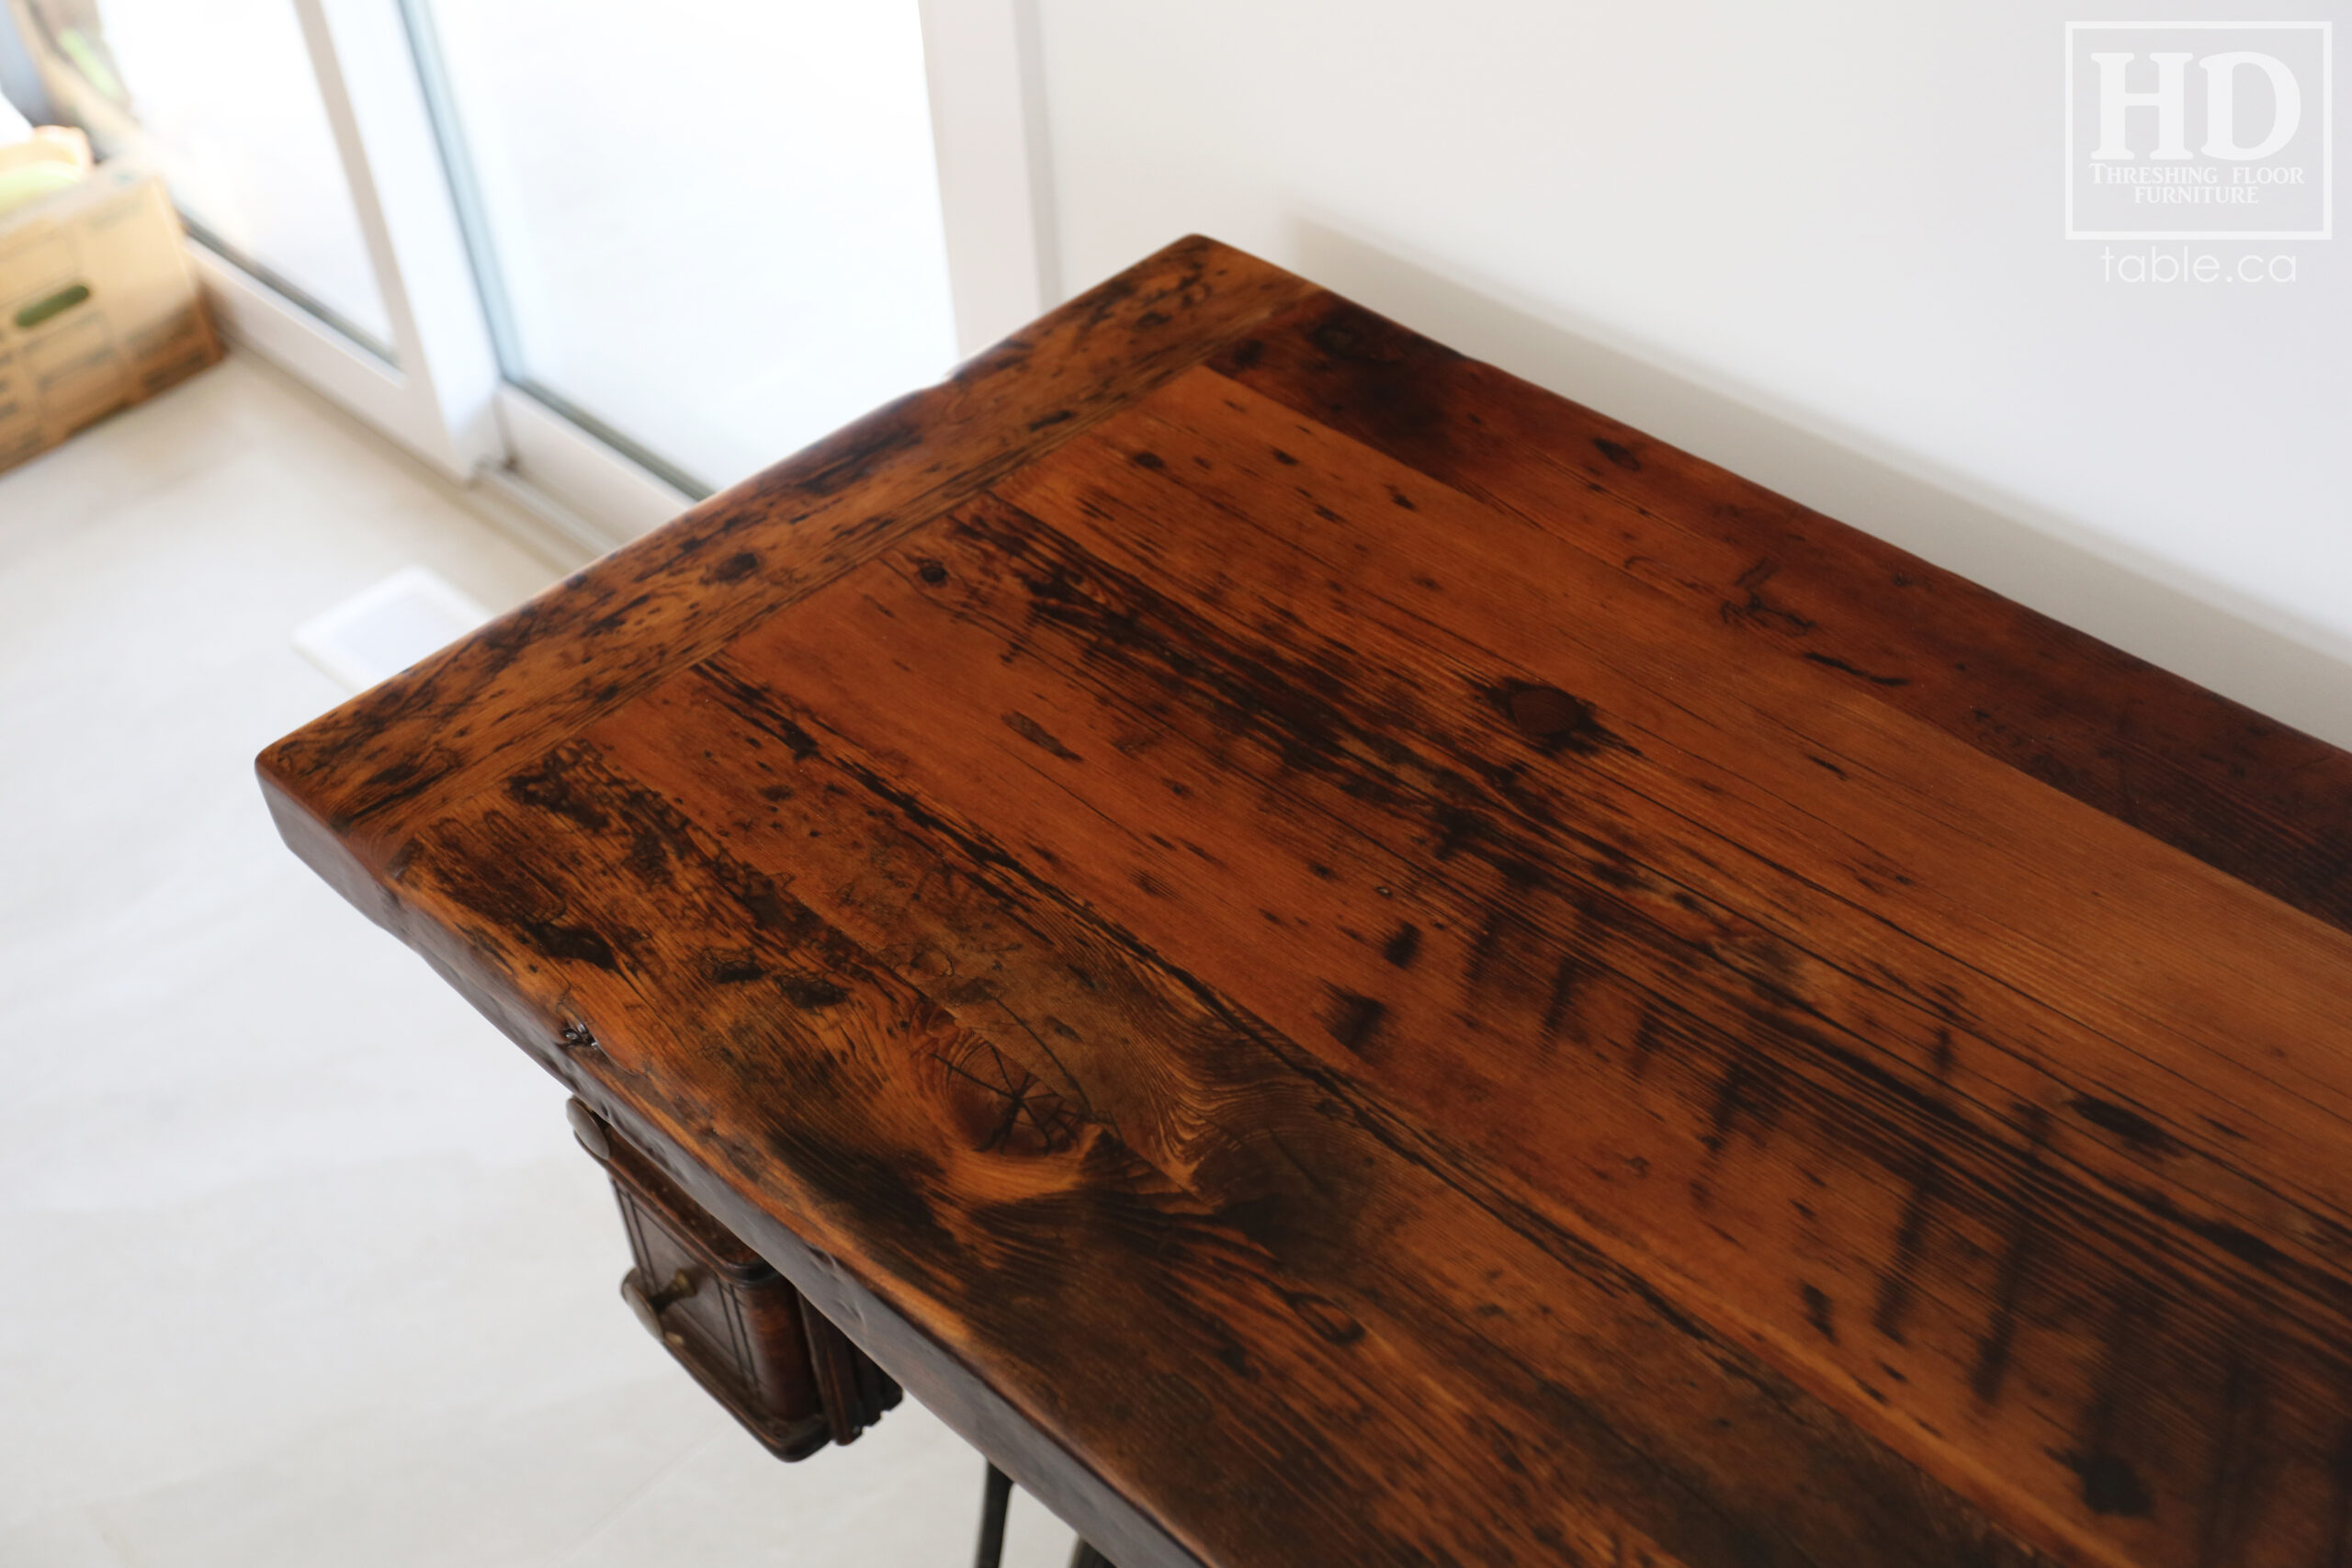 38" 3/4" x 20" Reclaimed Ontario Barnwood Top we made for a customer's antique Singer Sewing Machine base - Hemlock Threshing Floor Construction - Original edges & distressing maintained - Bread Board Ends - Premium epoxy + matte polyurethane finish / www.table.ca